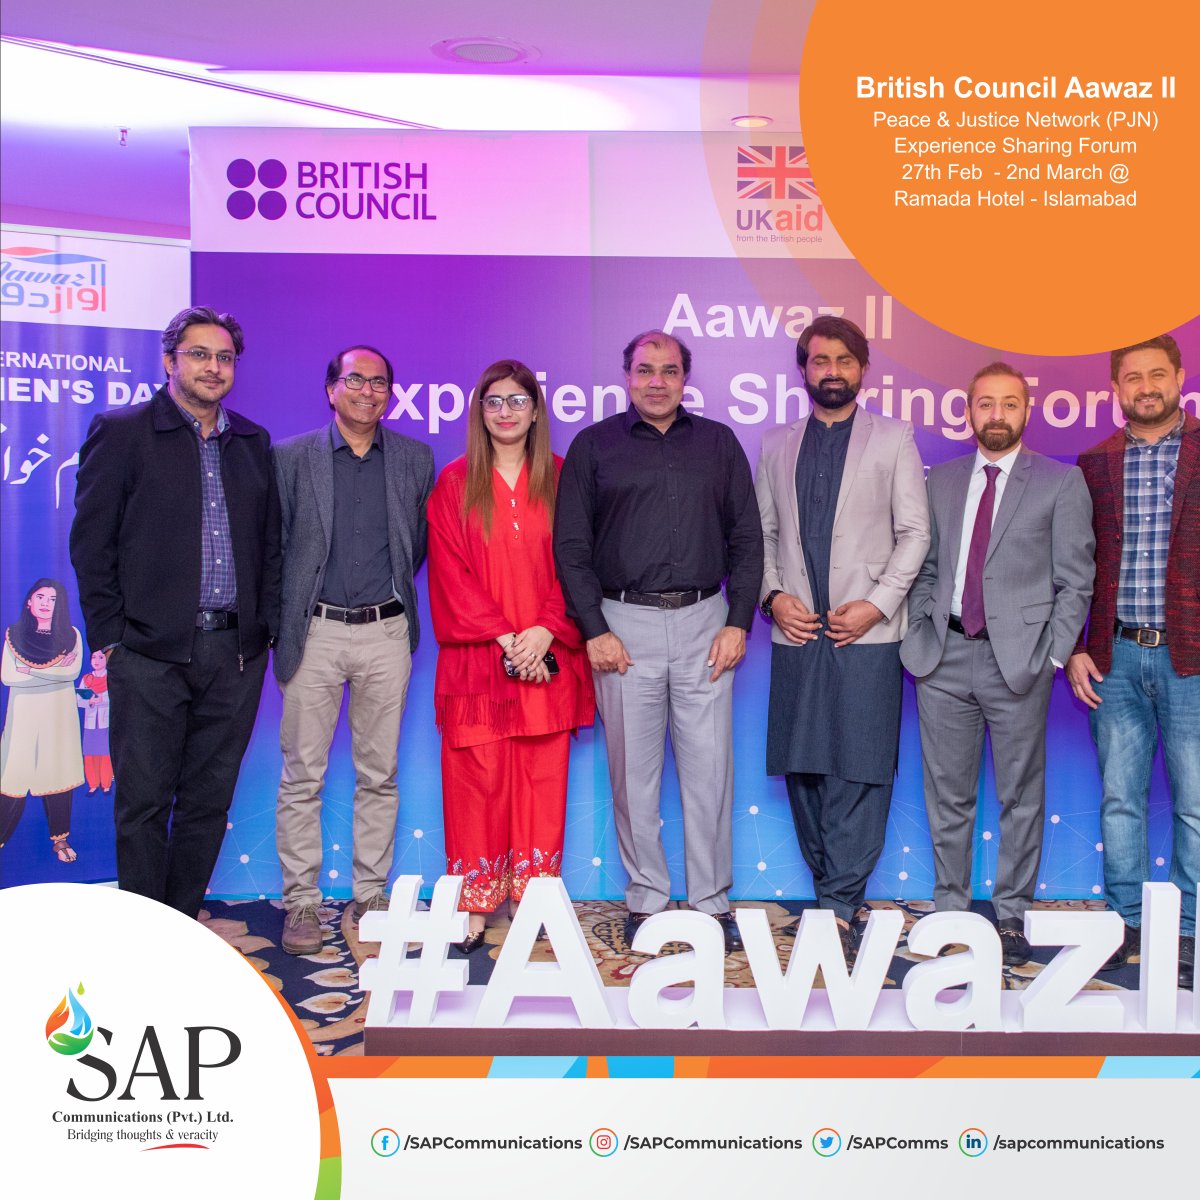 An event managed by our team by the title of ‘British Council Aawaz II’ for Peace & Justice Network (PJN) - Experience Sharing Forum, on 27th Feb - 2nd March @ Ramada Hotel – Islamabad.

#BritishCouncil #AawazII #PJN  #RamadaHotel
#Isb #IslamabadEvents #SAP